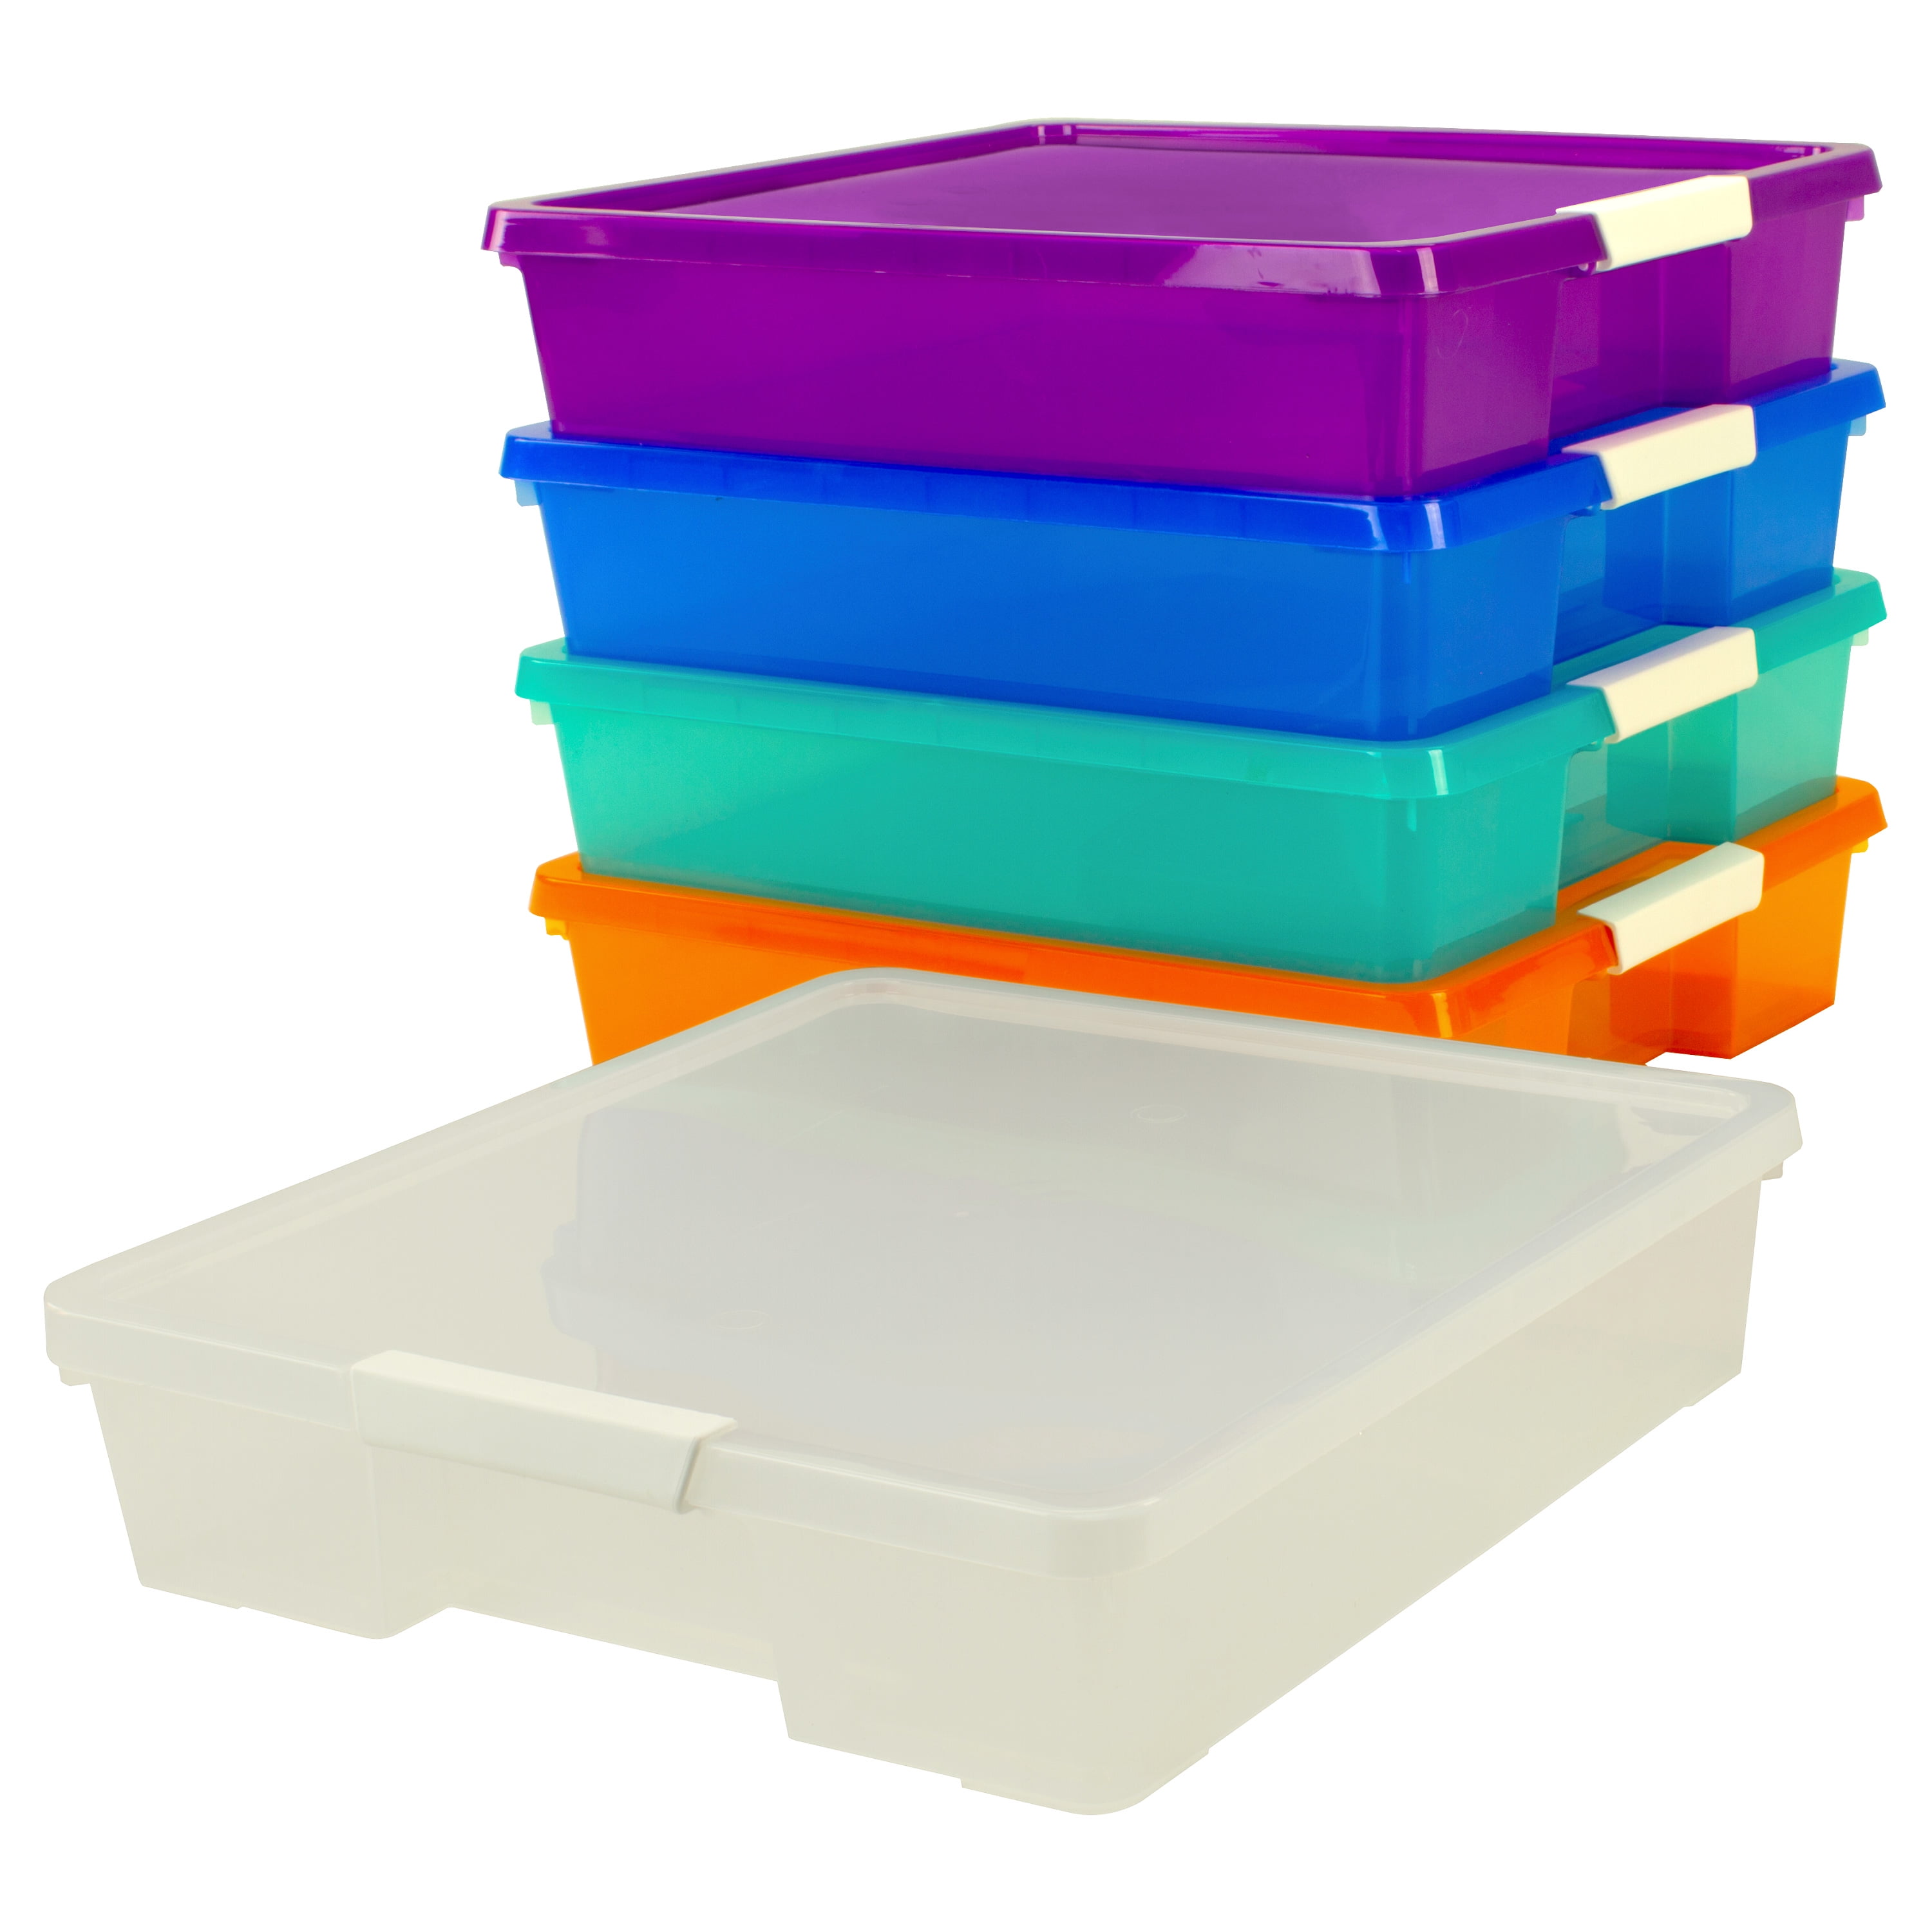 Superb Quality 12x12 storage boxes With Luring Discounts 